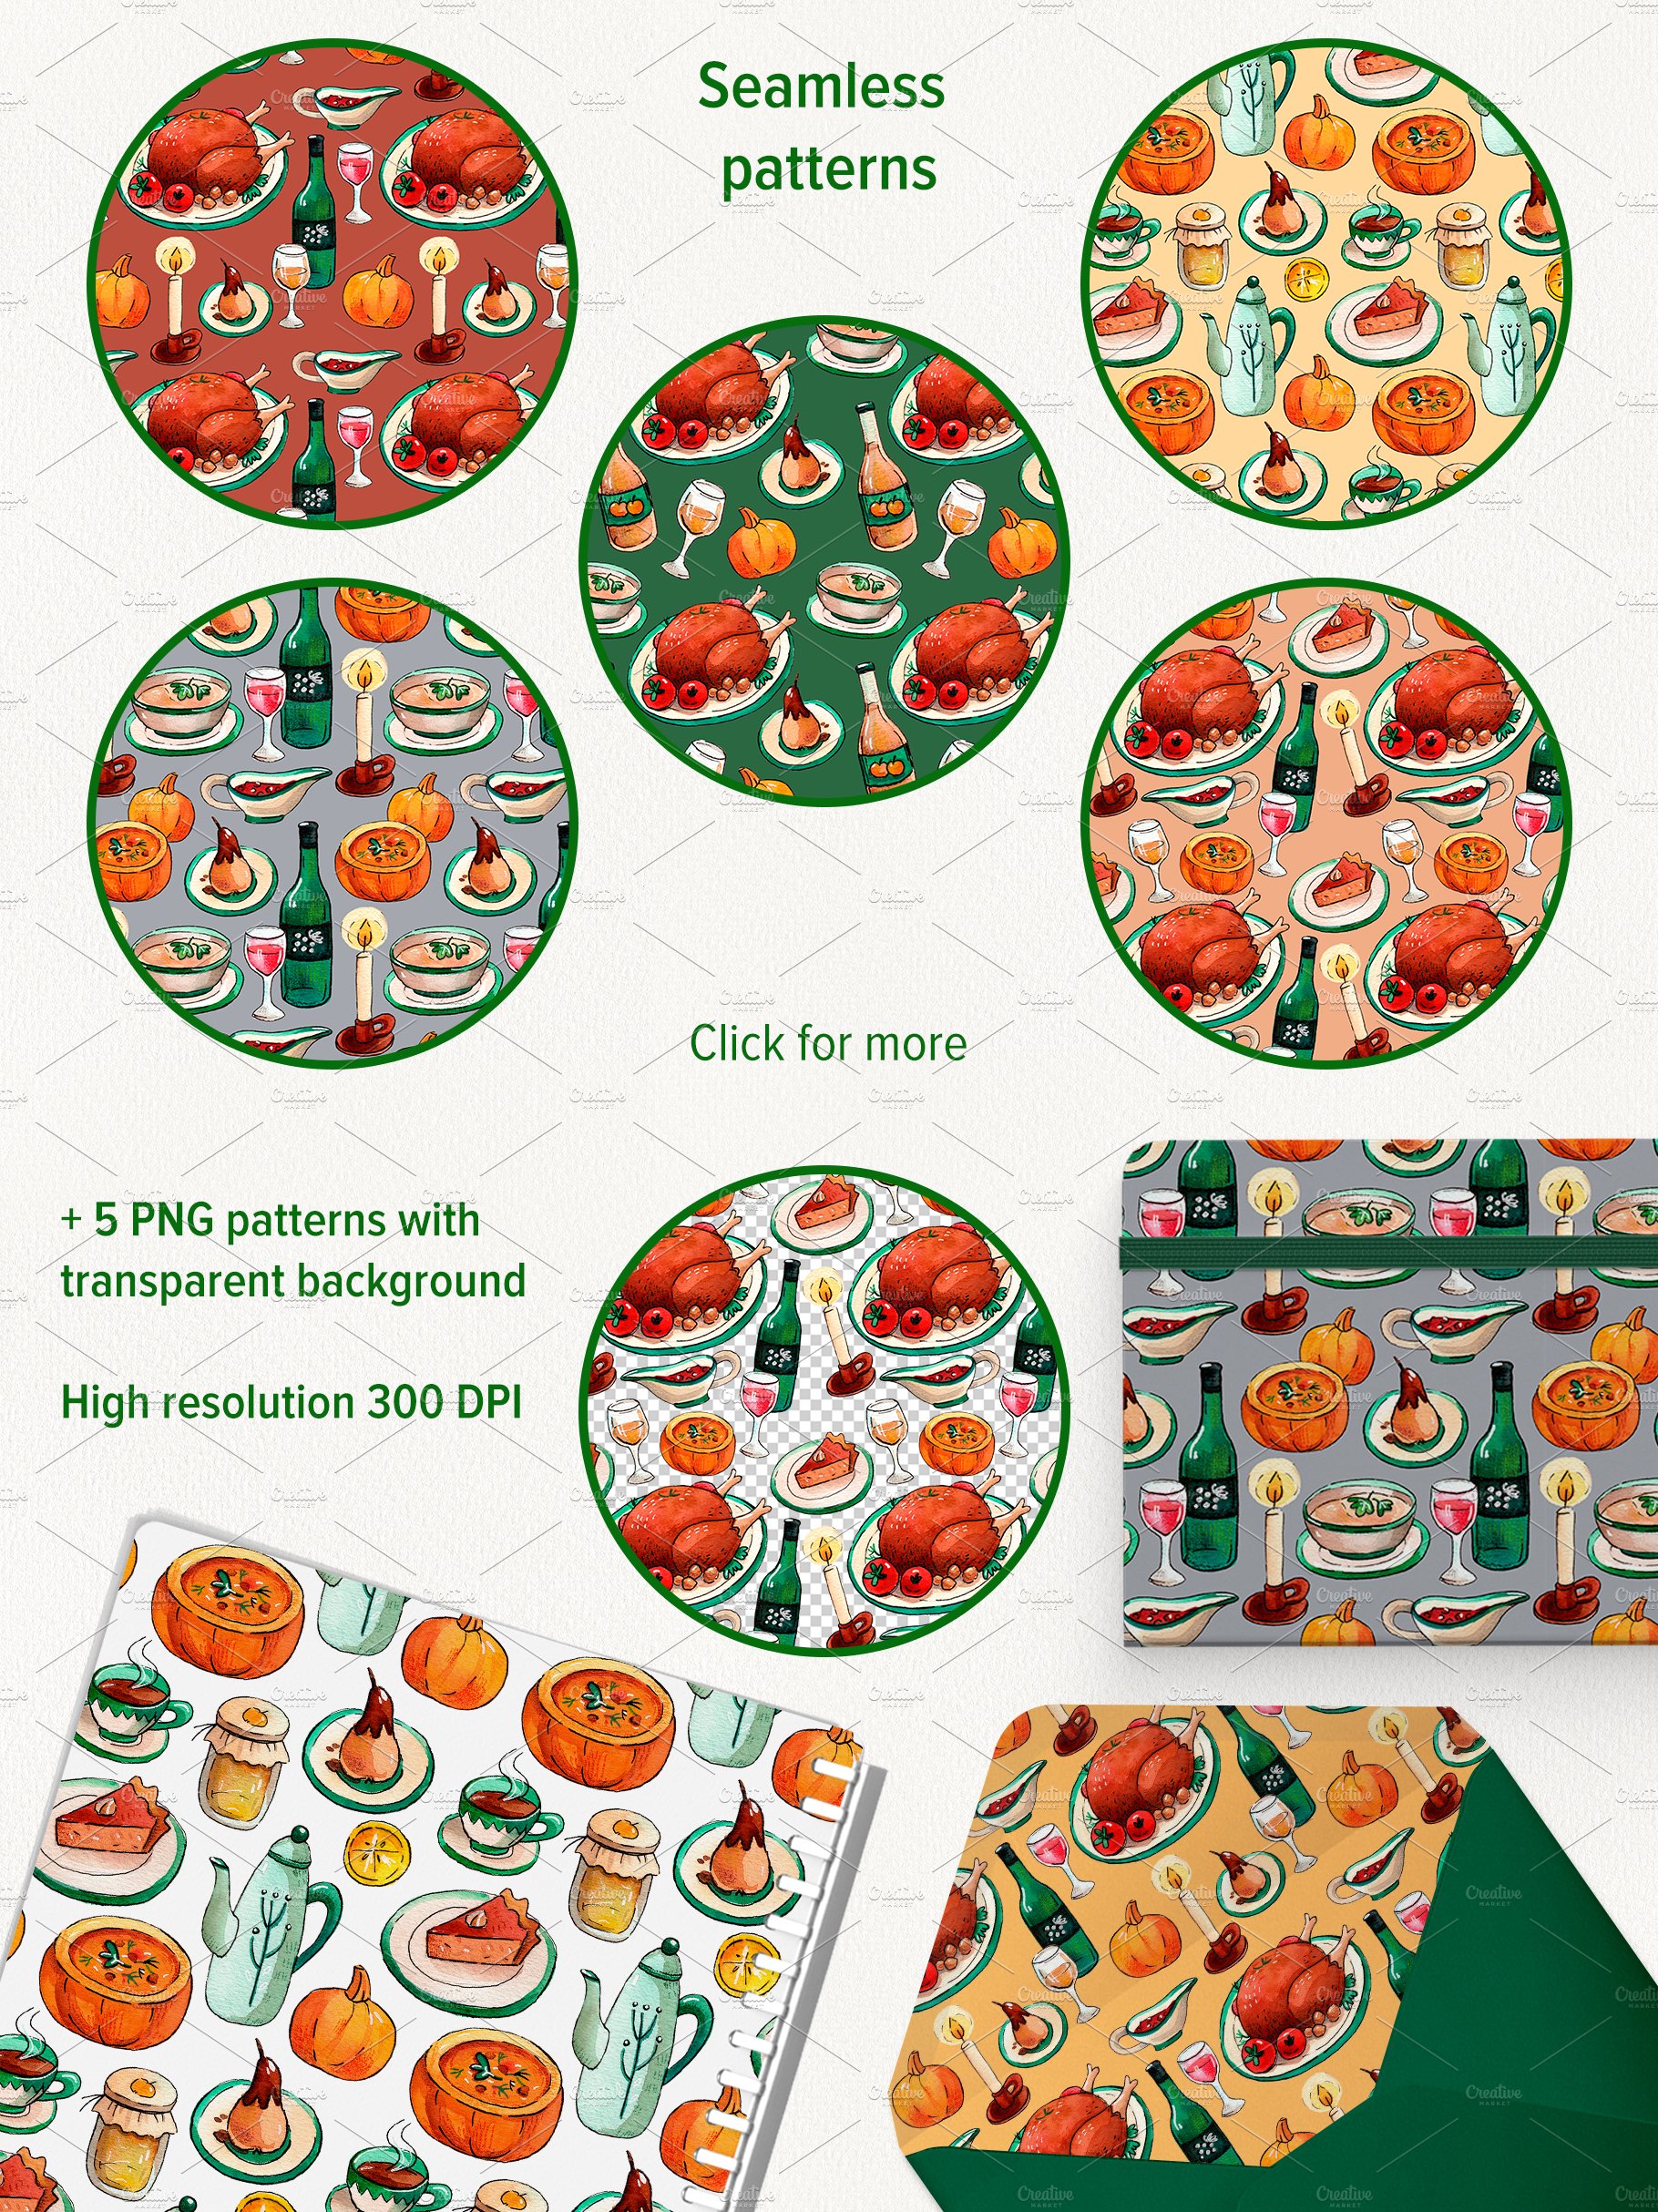 Some options of Thanksgiving patterns in a round shape.